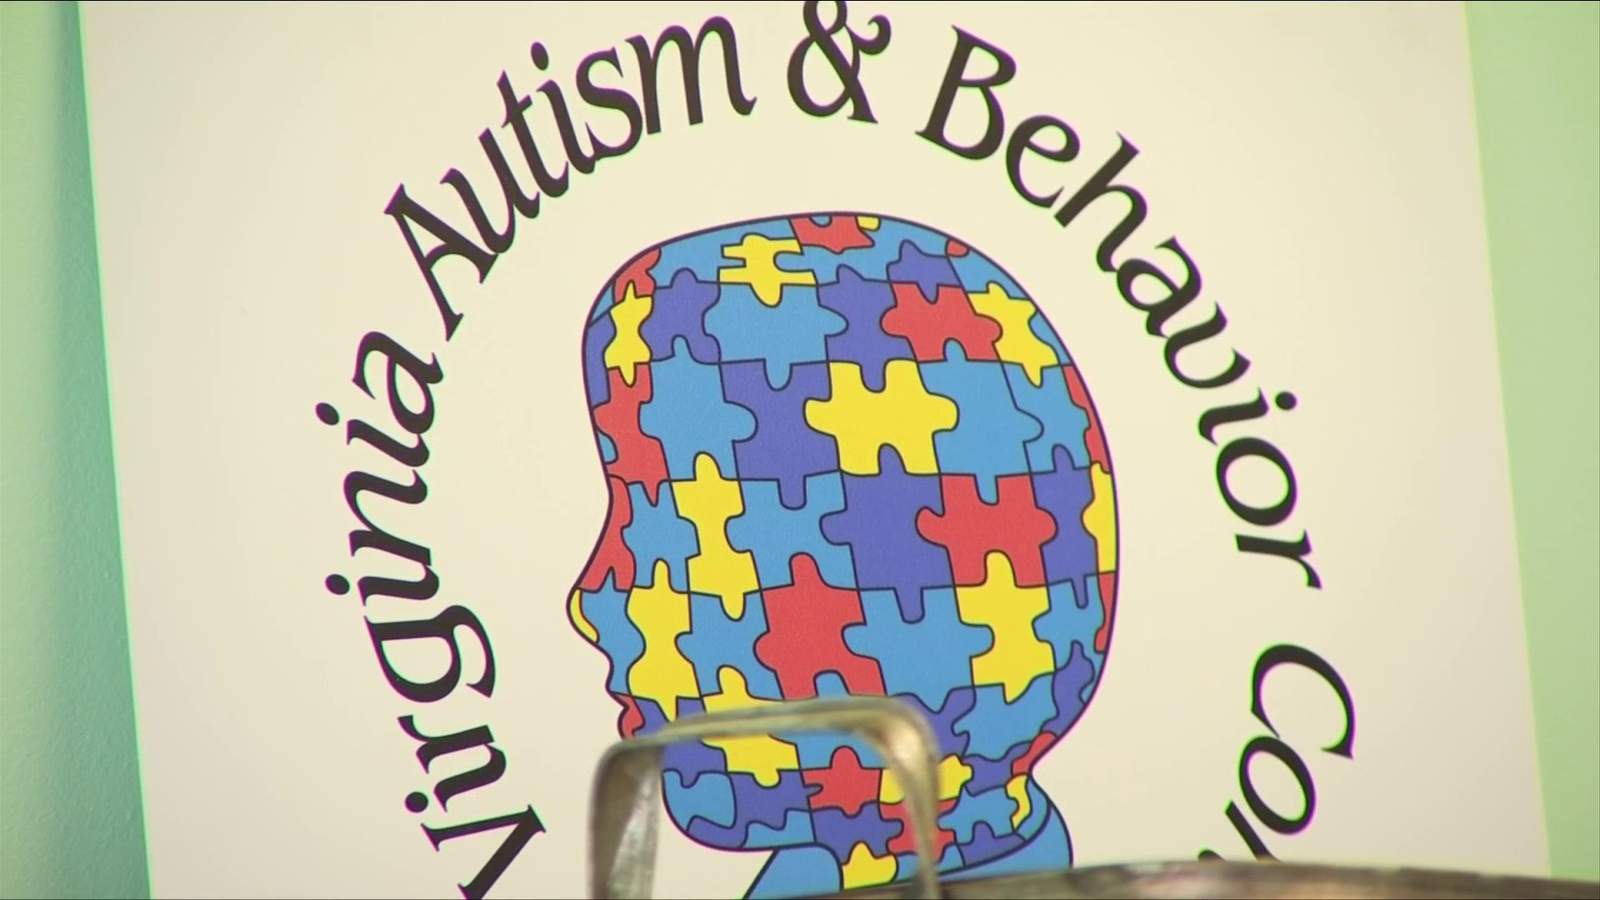 Local center calls for acceptance, not just awareness for those on autism spectrum